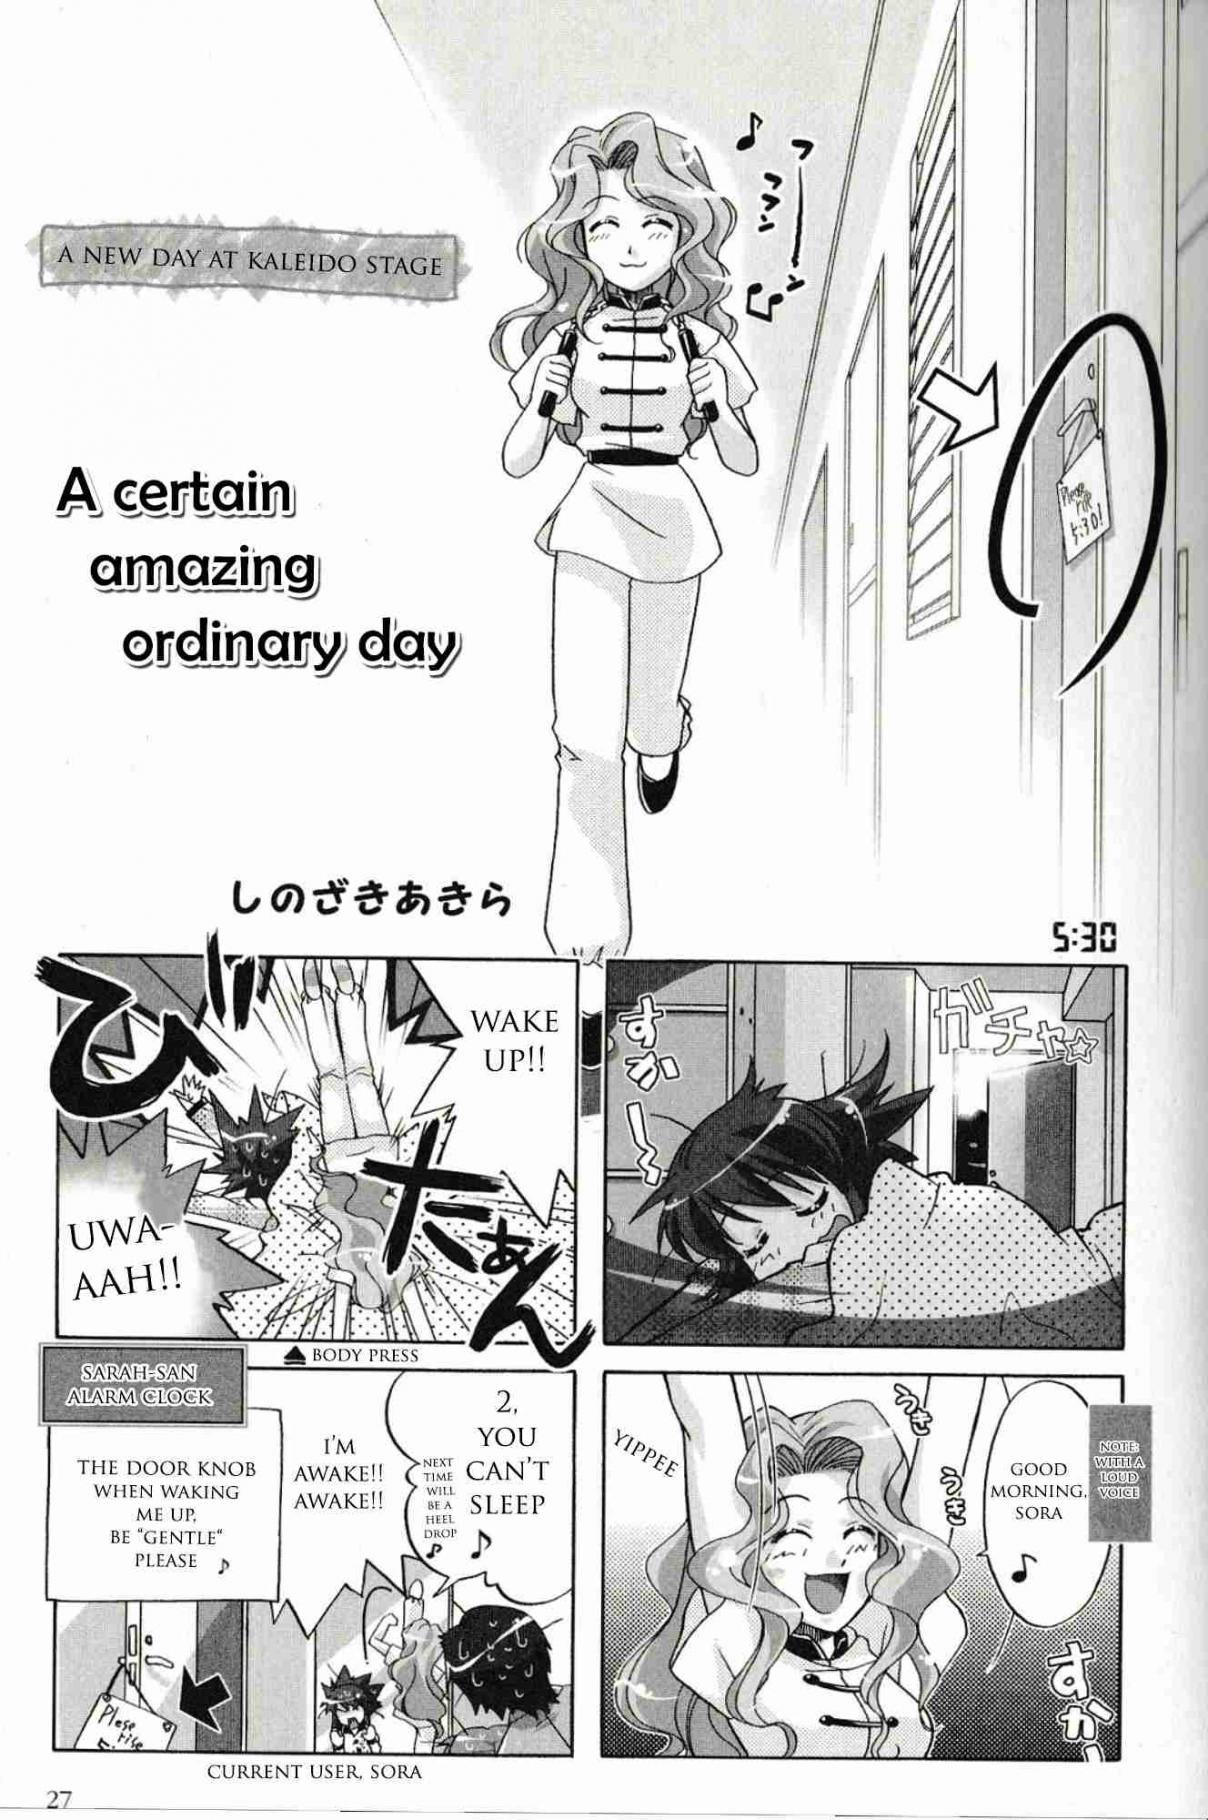 Kaleido star comic anthology Vol. 1 Ch. 3 A certain amazing ordinary day